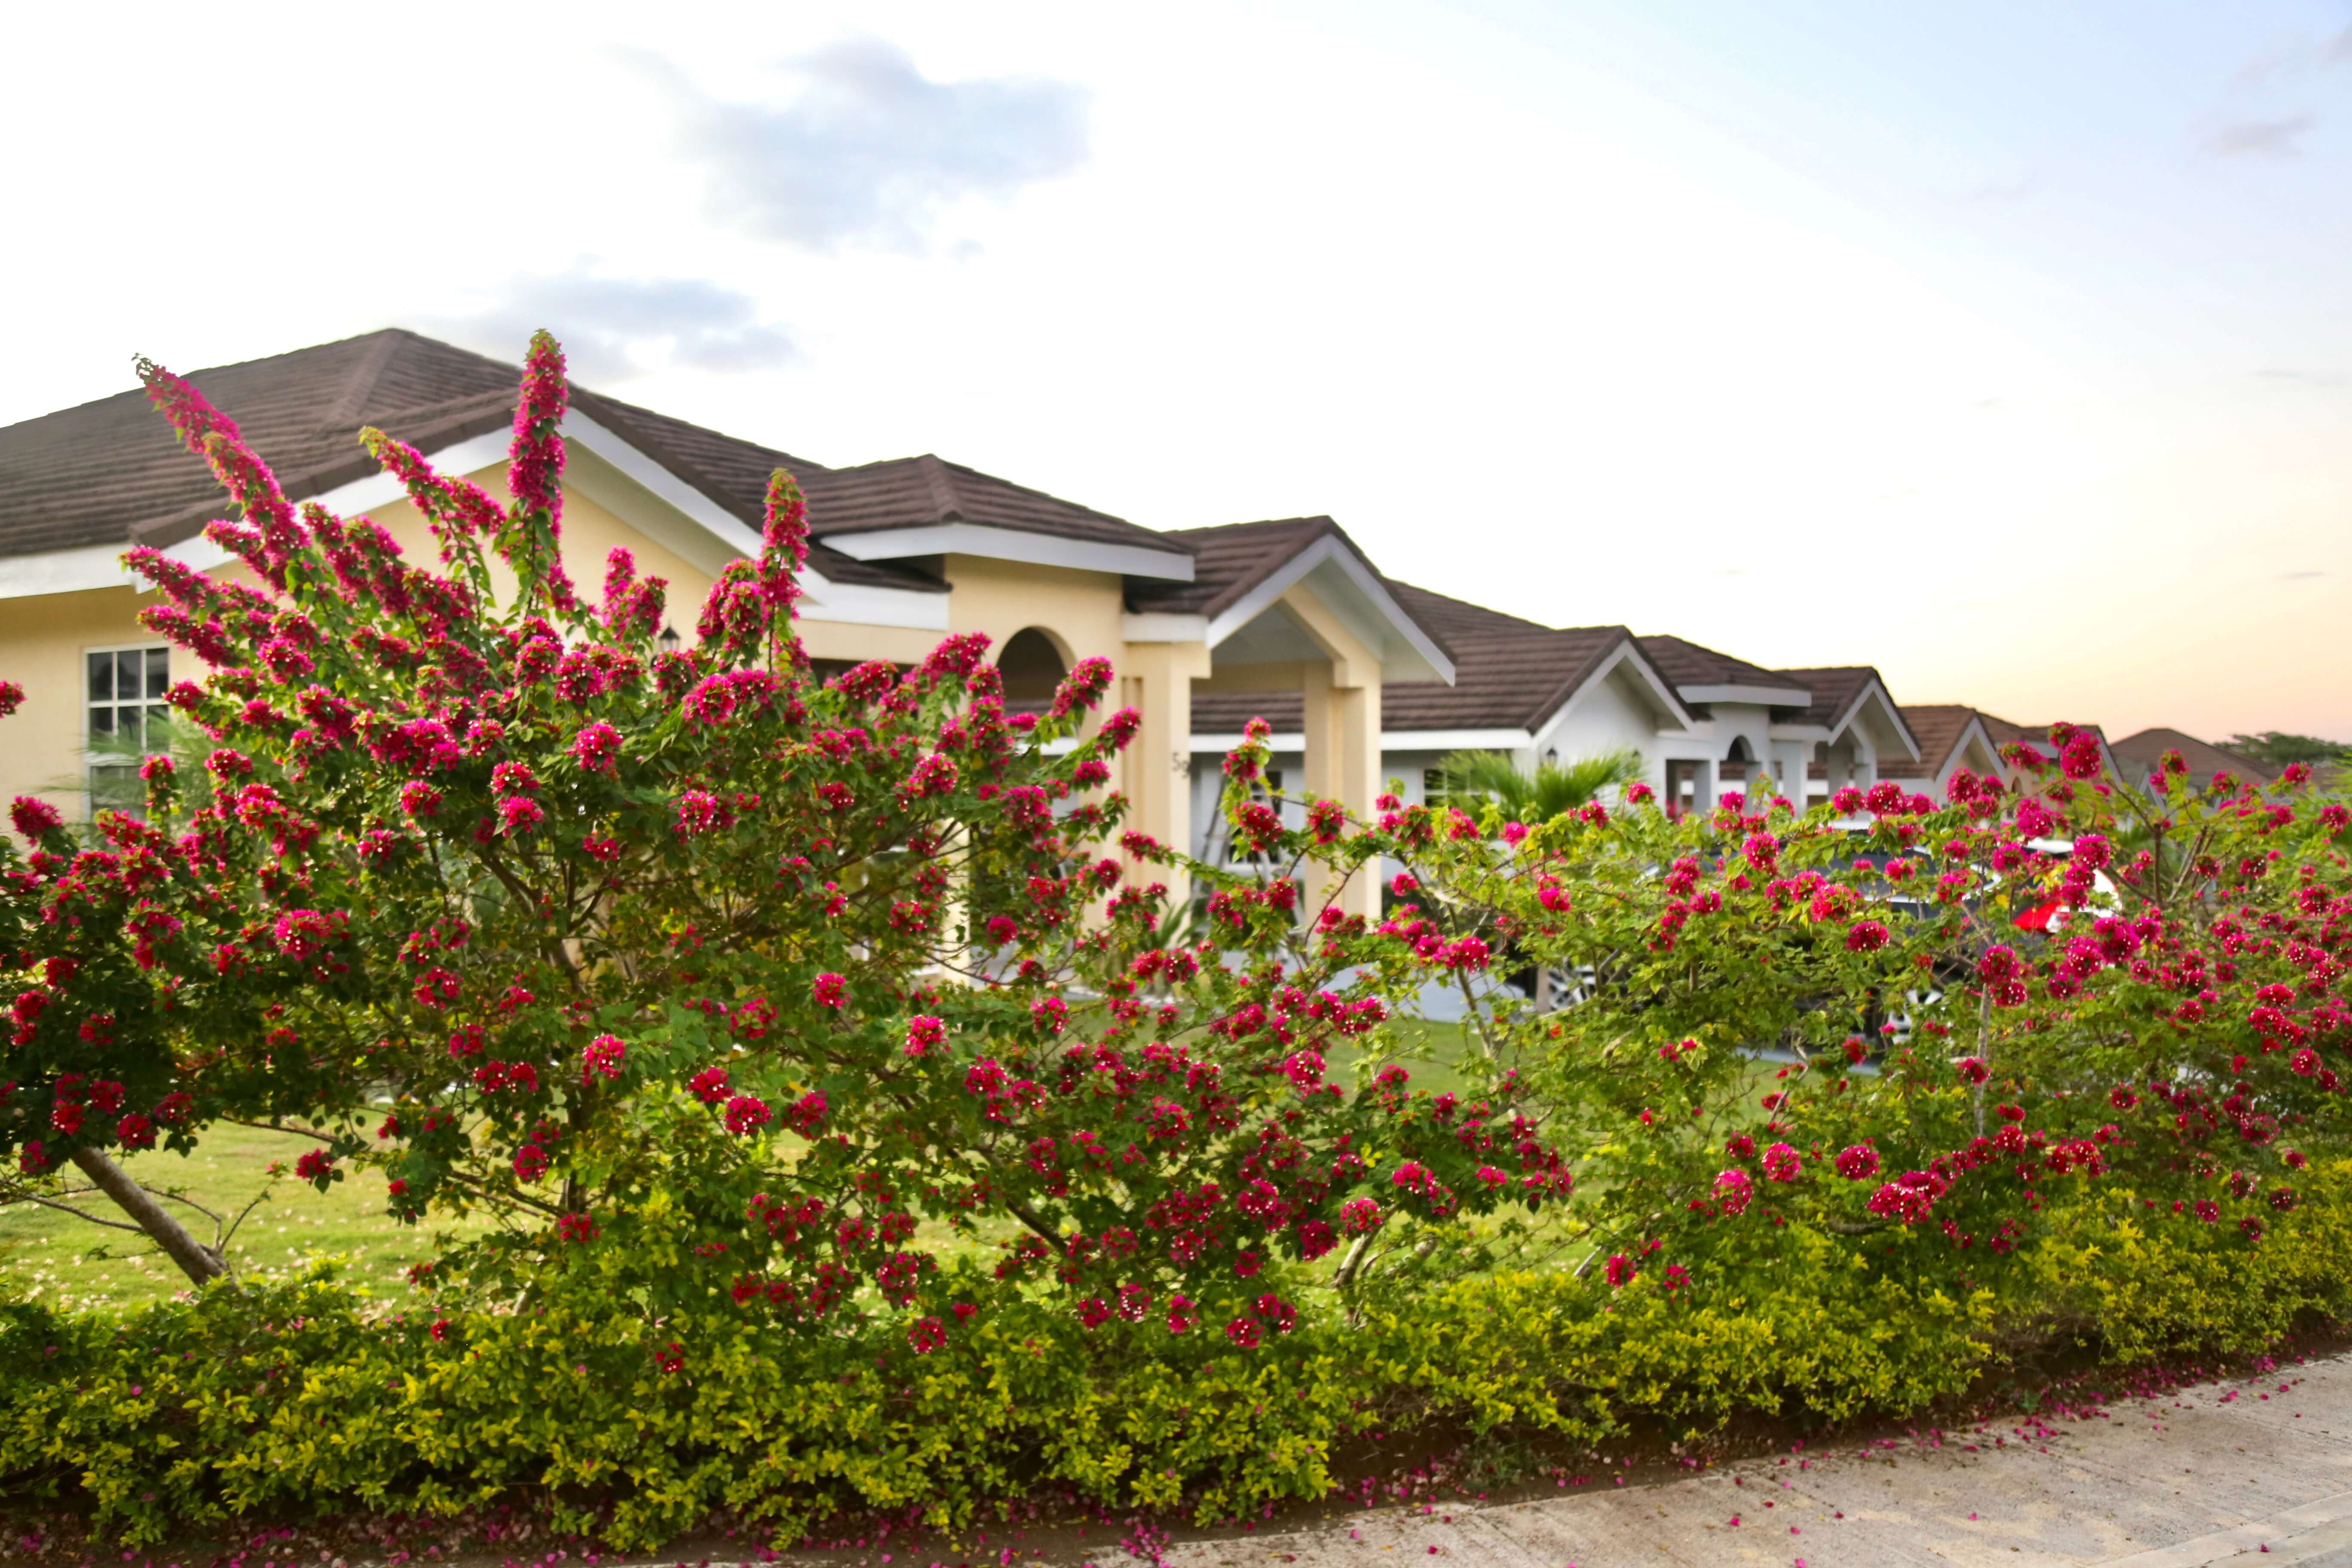 New Homes For Sale in Jamaica